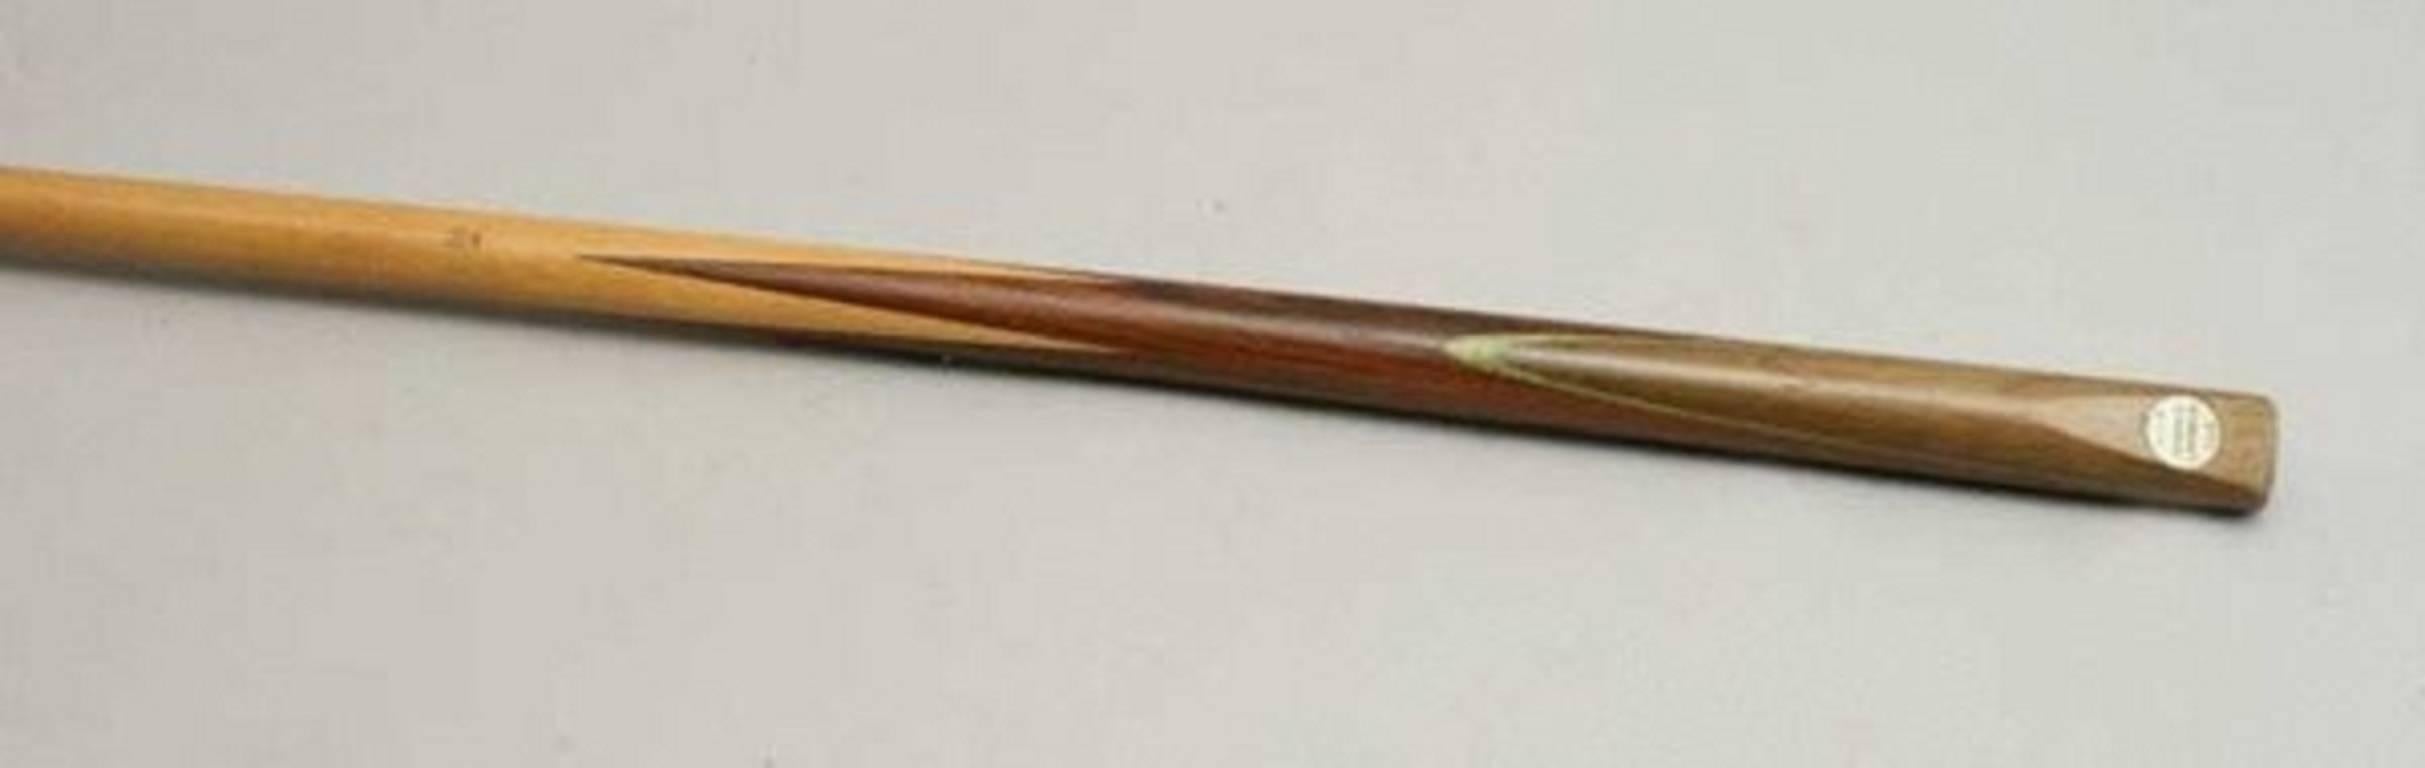 Billiard / Snooker Cue, Horace Lindrum. 
A spliced beech olive and hard wood cue with an ivorine disc - Club Cue Horace Lindrum. He was born in 1912 in Paddington, Sydney, the nephew of Walter Lindrum a World Champion Billiard player. Horace became